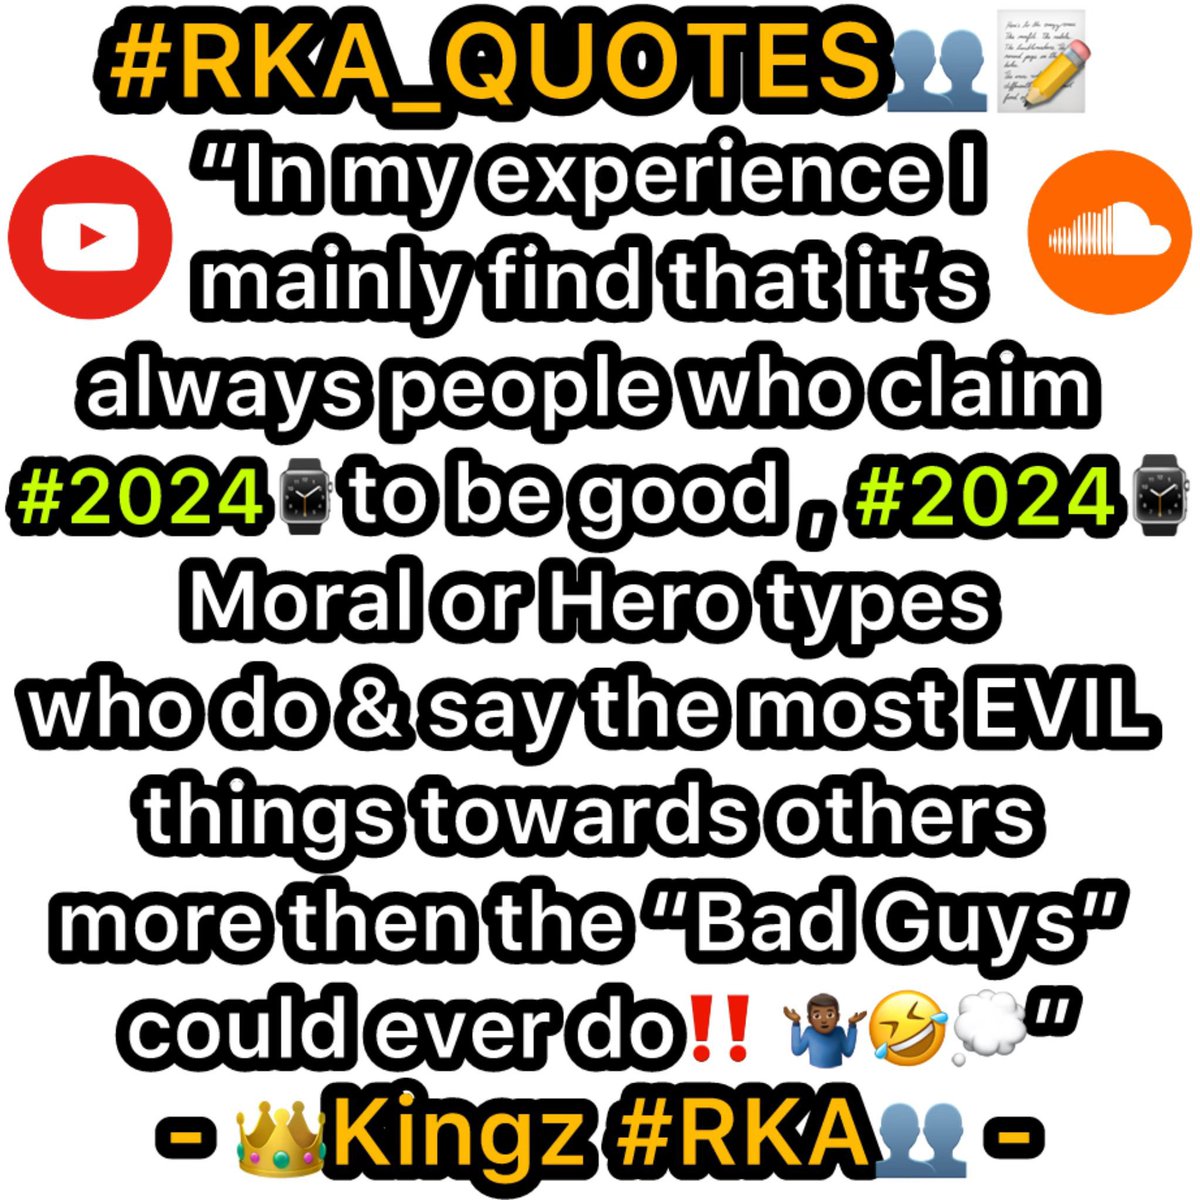 #RKA_QUOTES👥📝 #2024🕑 “In my experience I mainly find that it’s always people who claim to be good , Moral or Hero types who do & say the most evil things towards others more then the “Bad Guys” could ever do‼️ 🤷🏾‍♂️🤣💭” - 👑Kingz #RKA👥 - #RKA youtube.com/channel/UCgk4e…